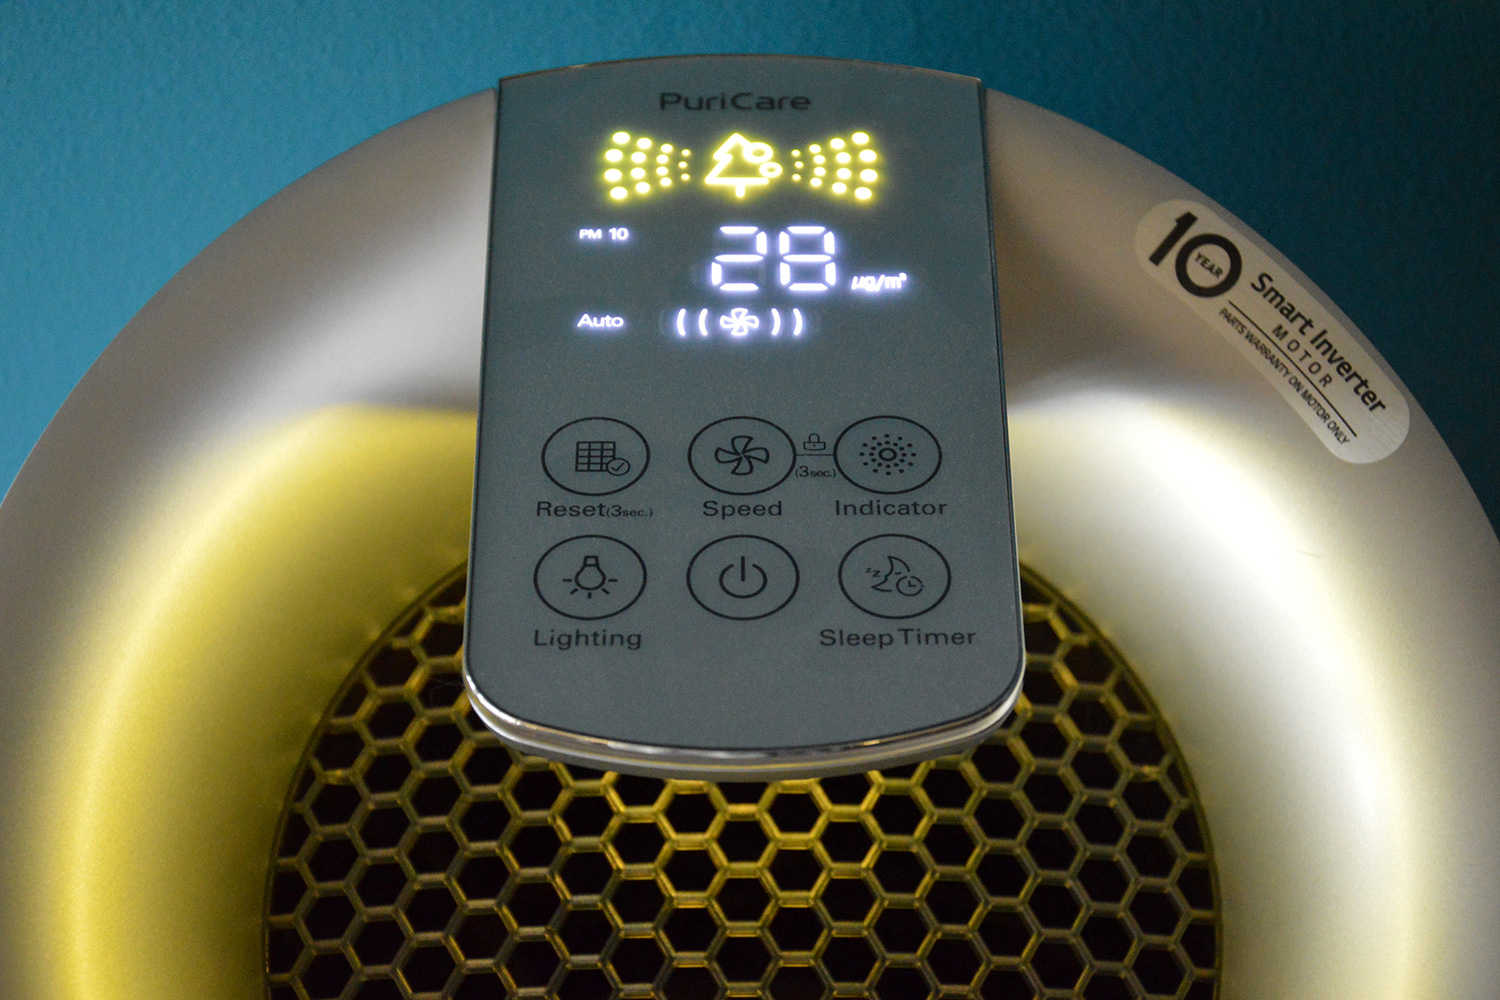 LG Puricare air purifier review yellow top center